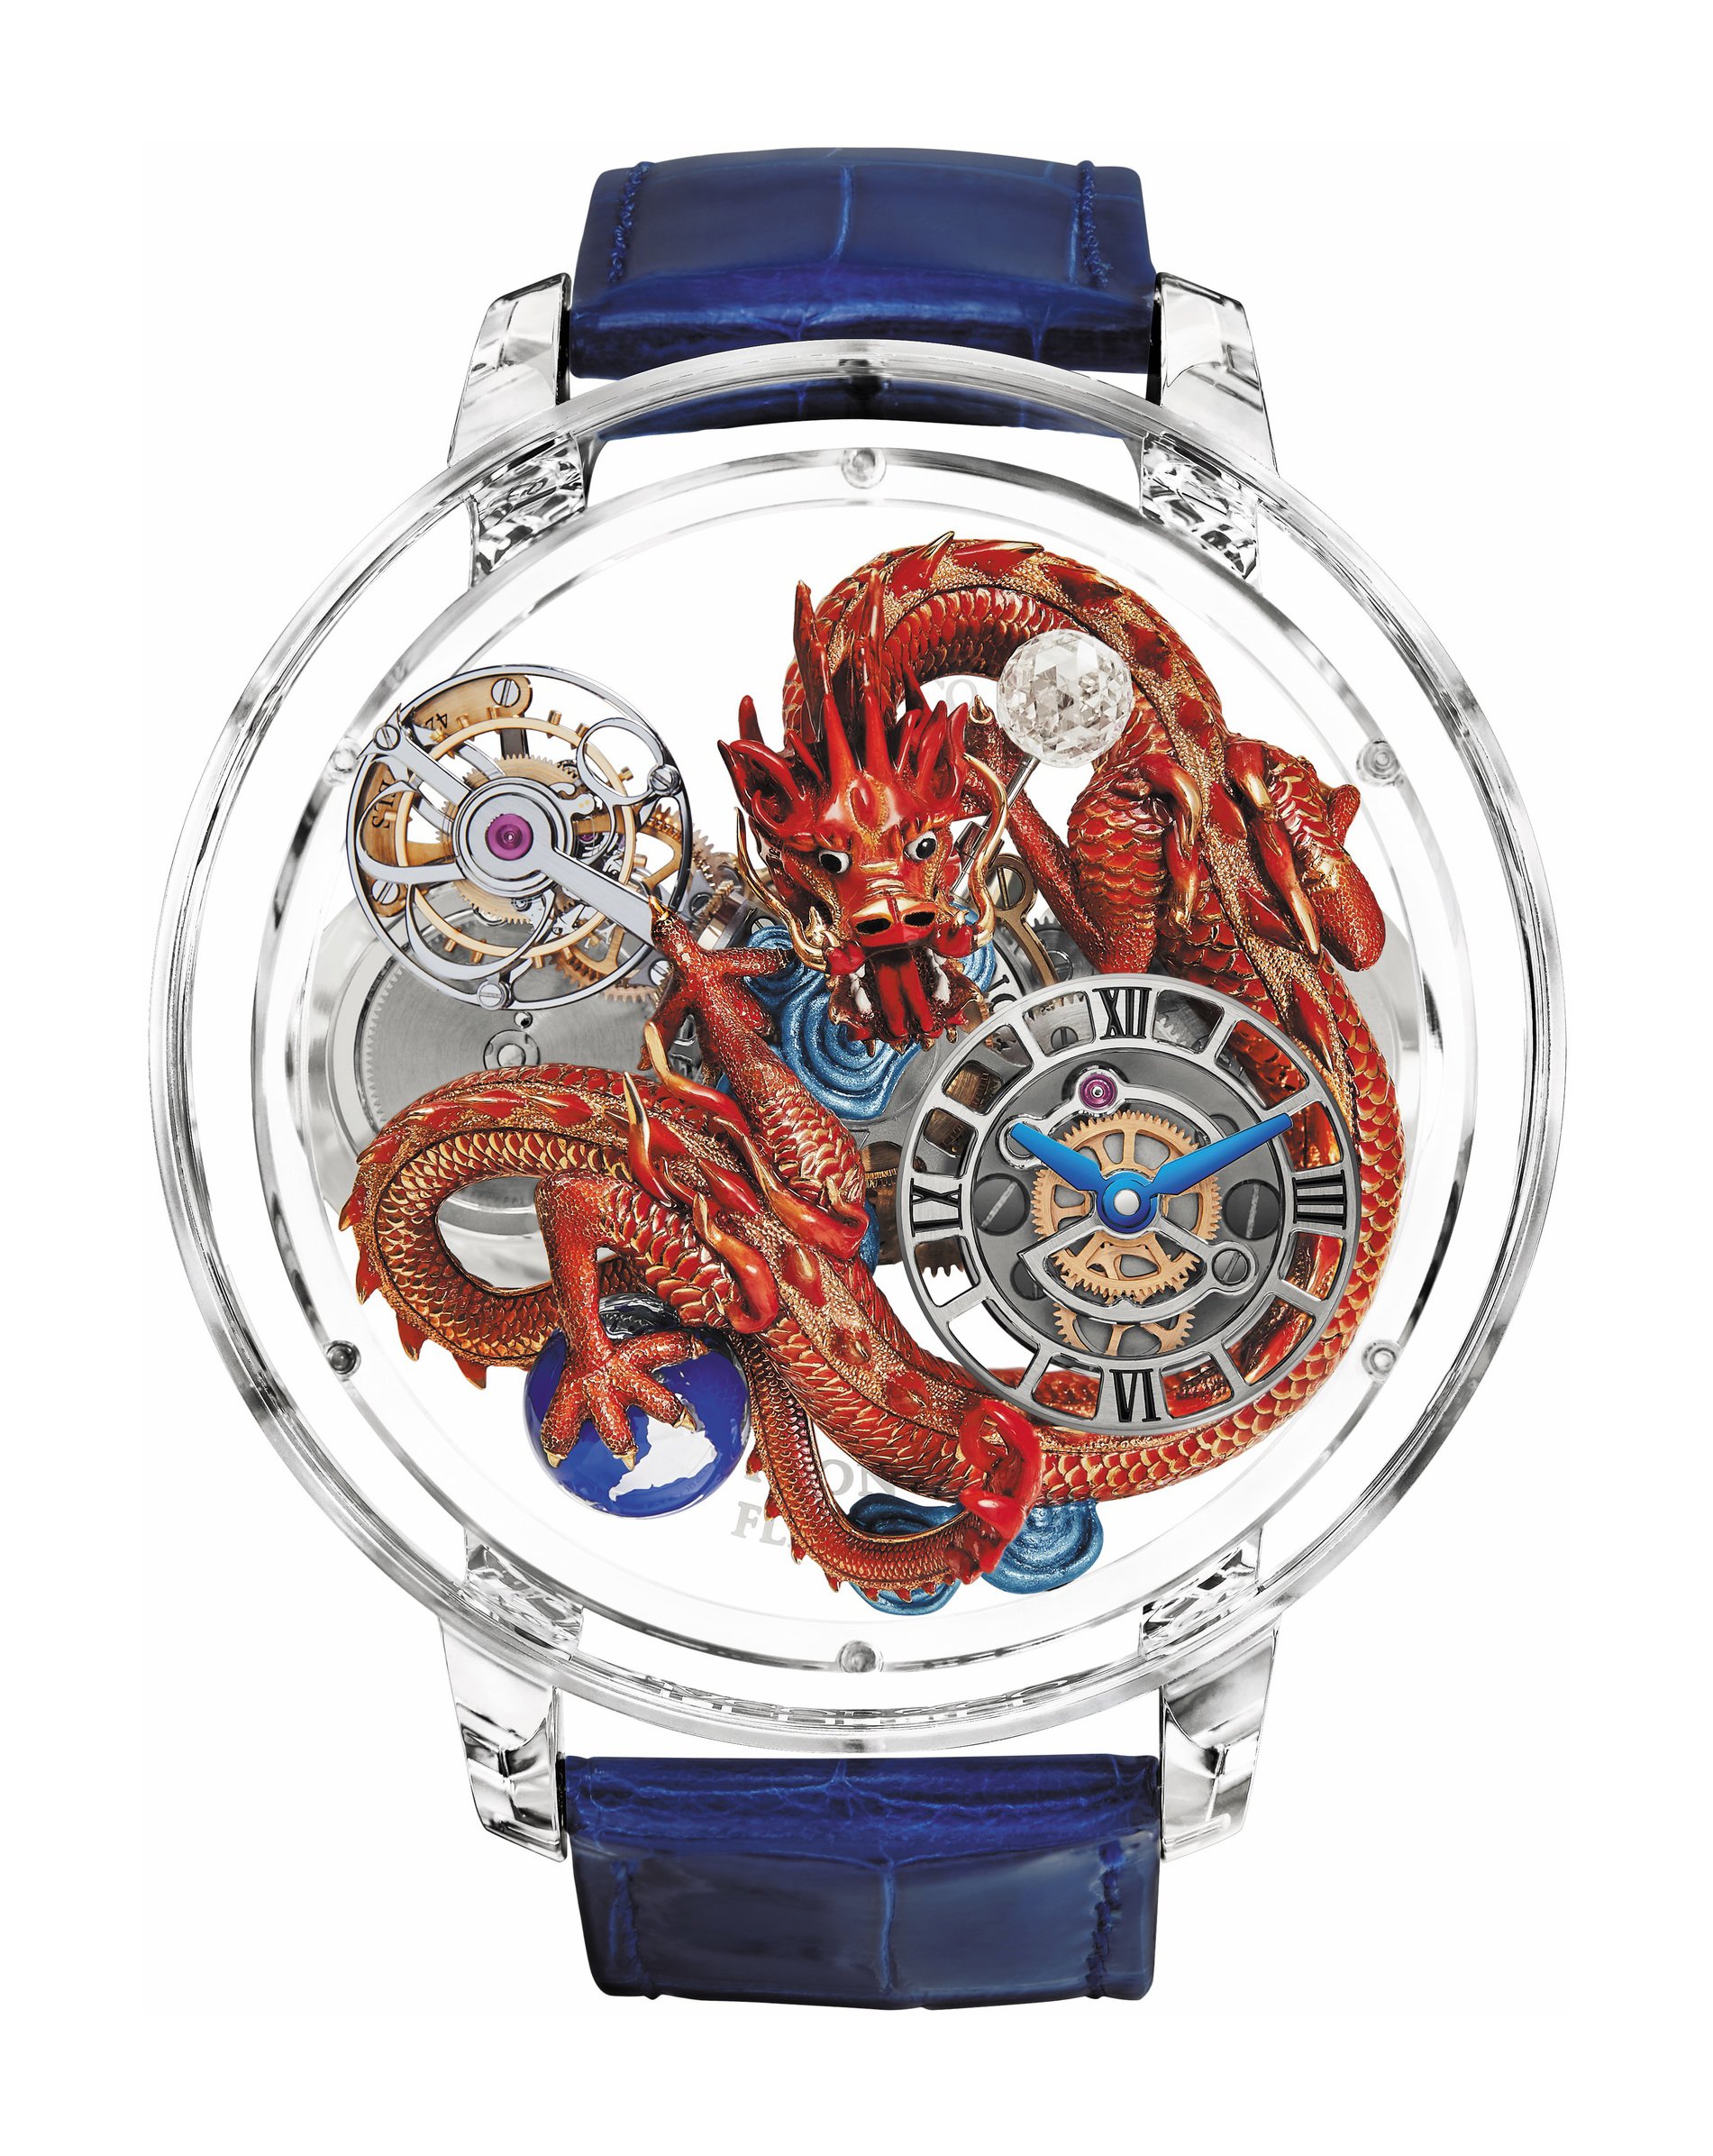 Jacob & Co Astronomia Flawless Imperial Dragon replica watch AT125.80.DR.UA.B